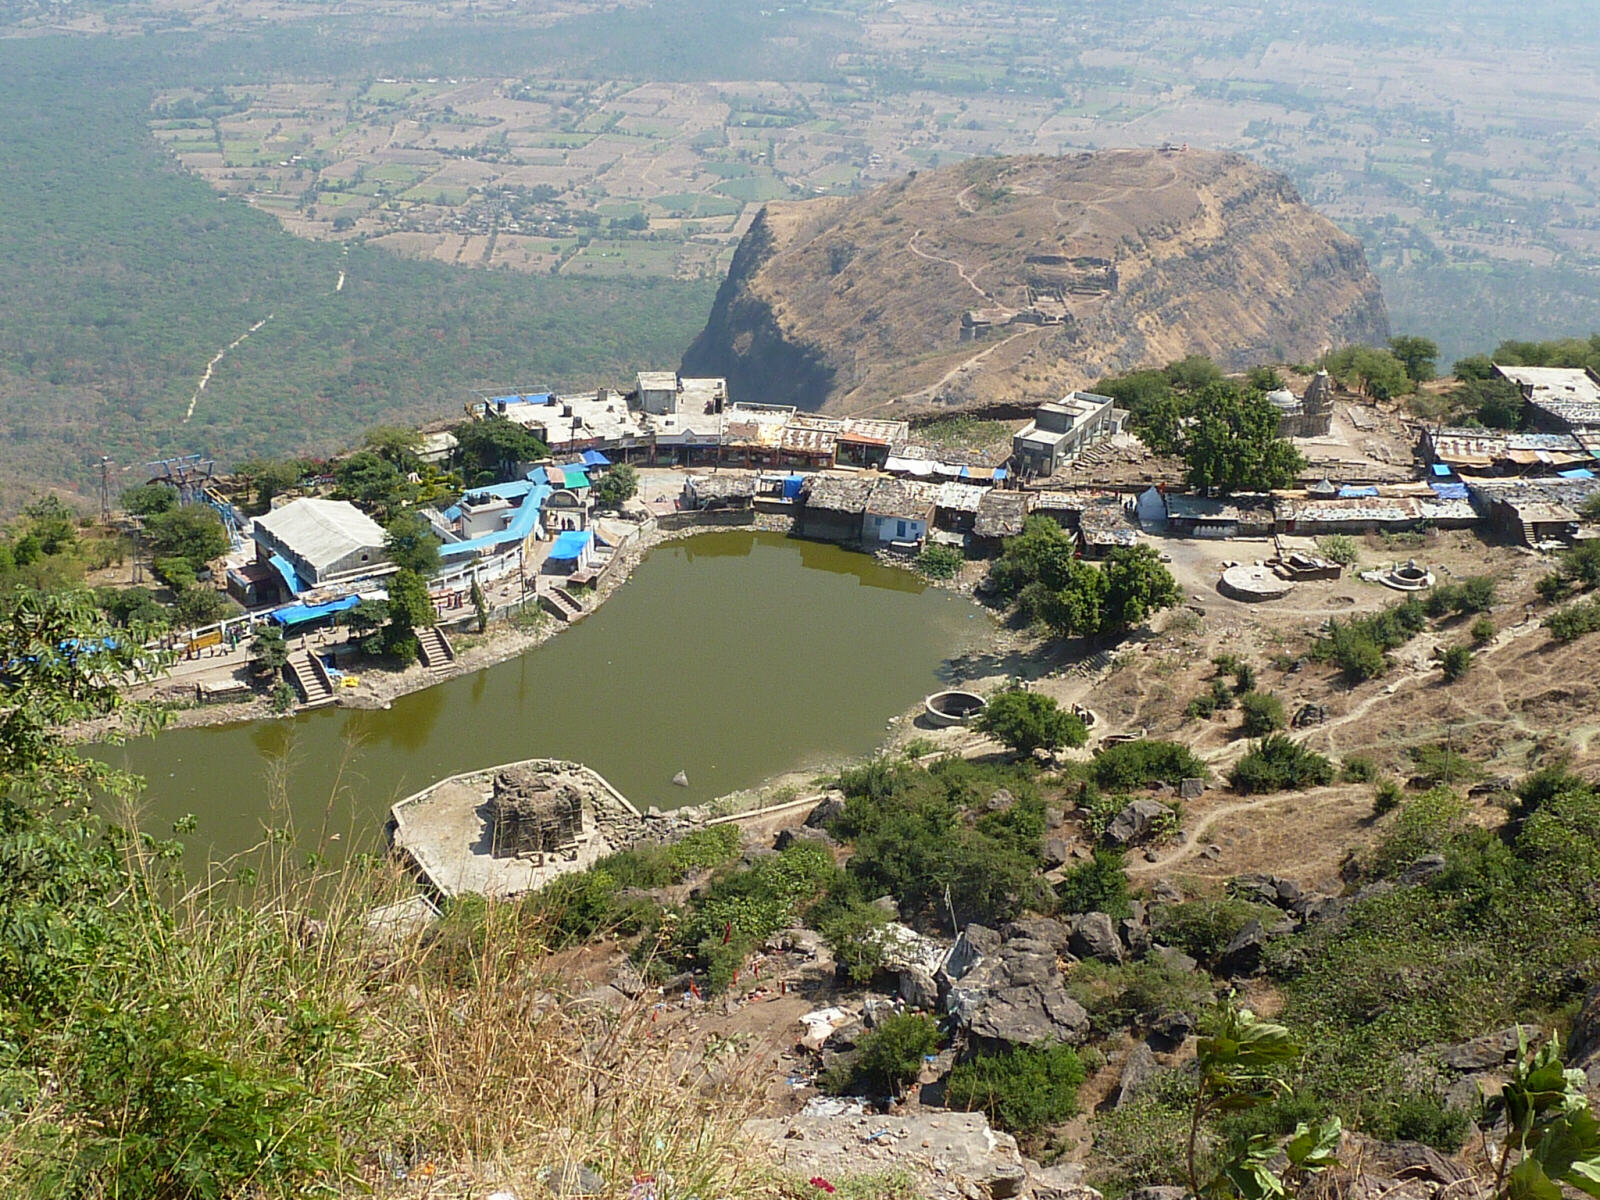 View from Pavagadh hill, Champaner, Gujerat, India